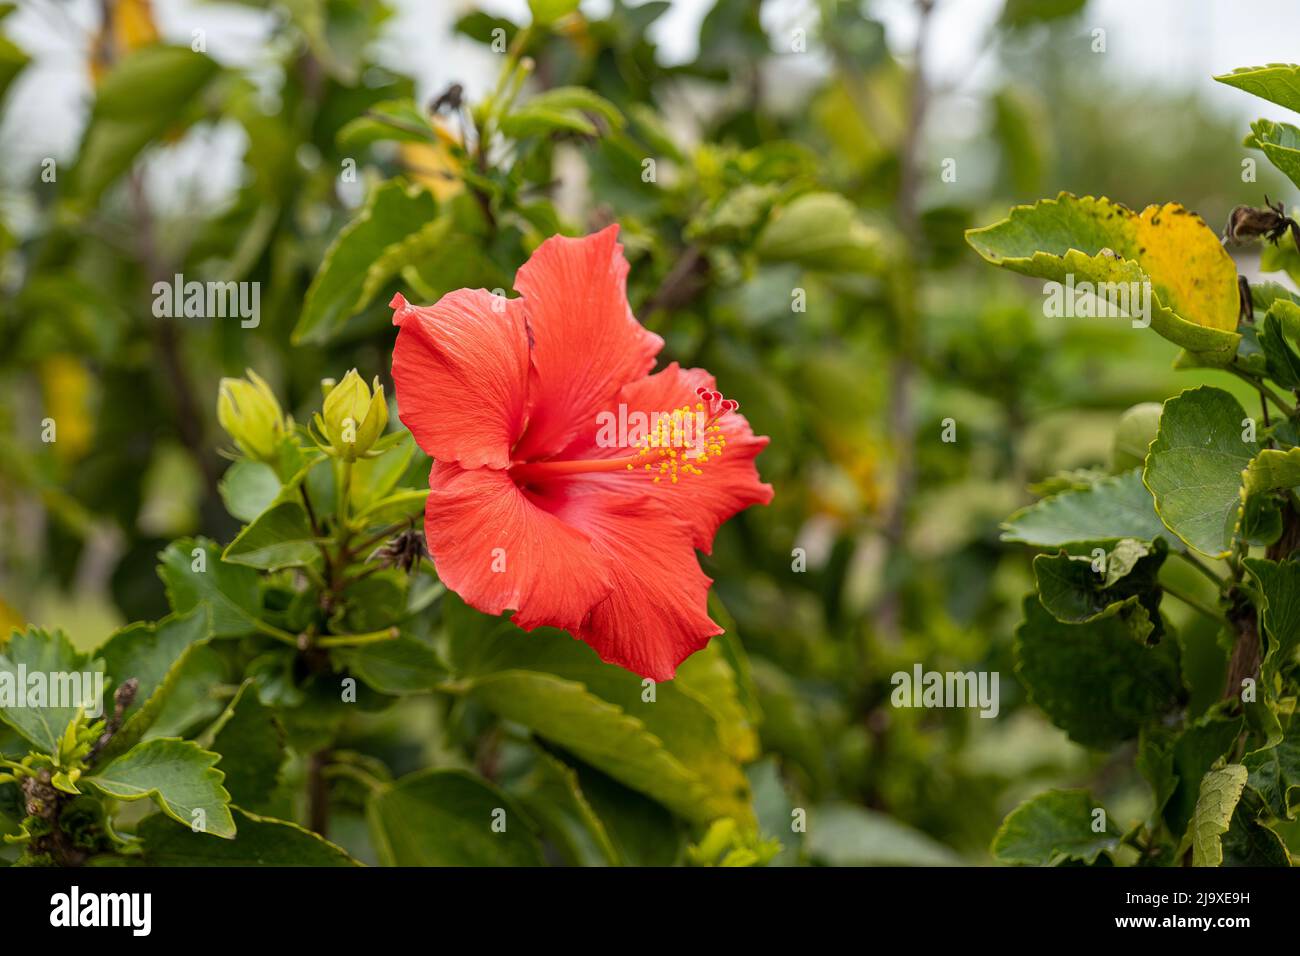 Beautifull red flower blossom on live plant with green leaves. Red Camellia Theaceae bloom with reproductive organs, yellow stamen and red pistil, dis Stock Photo